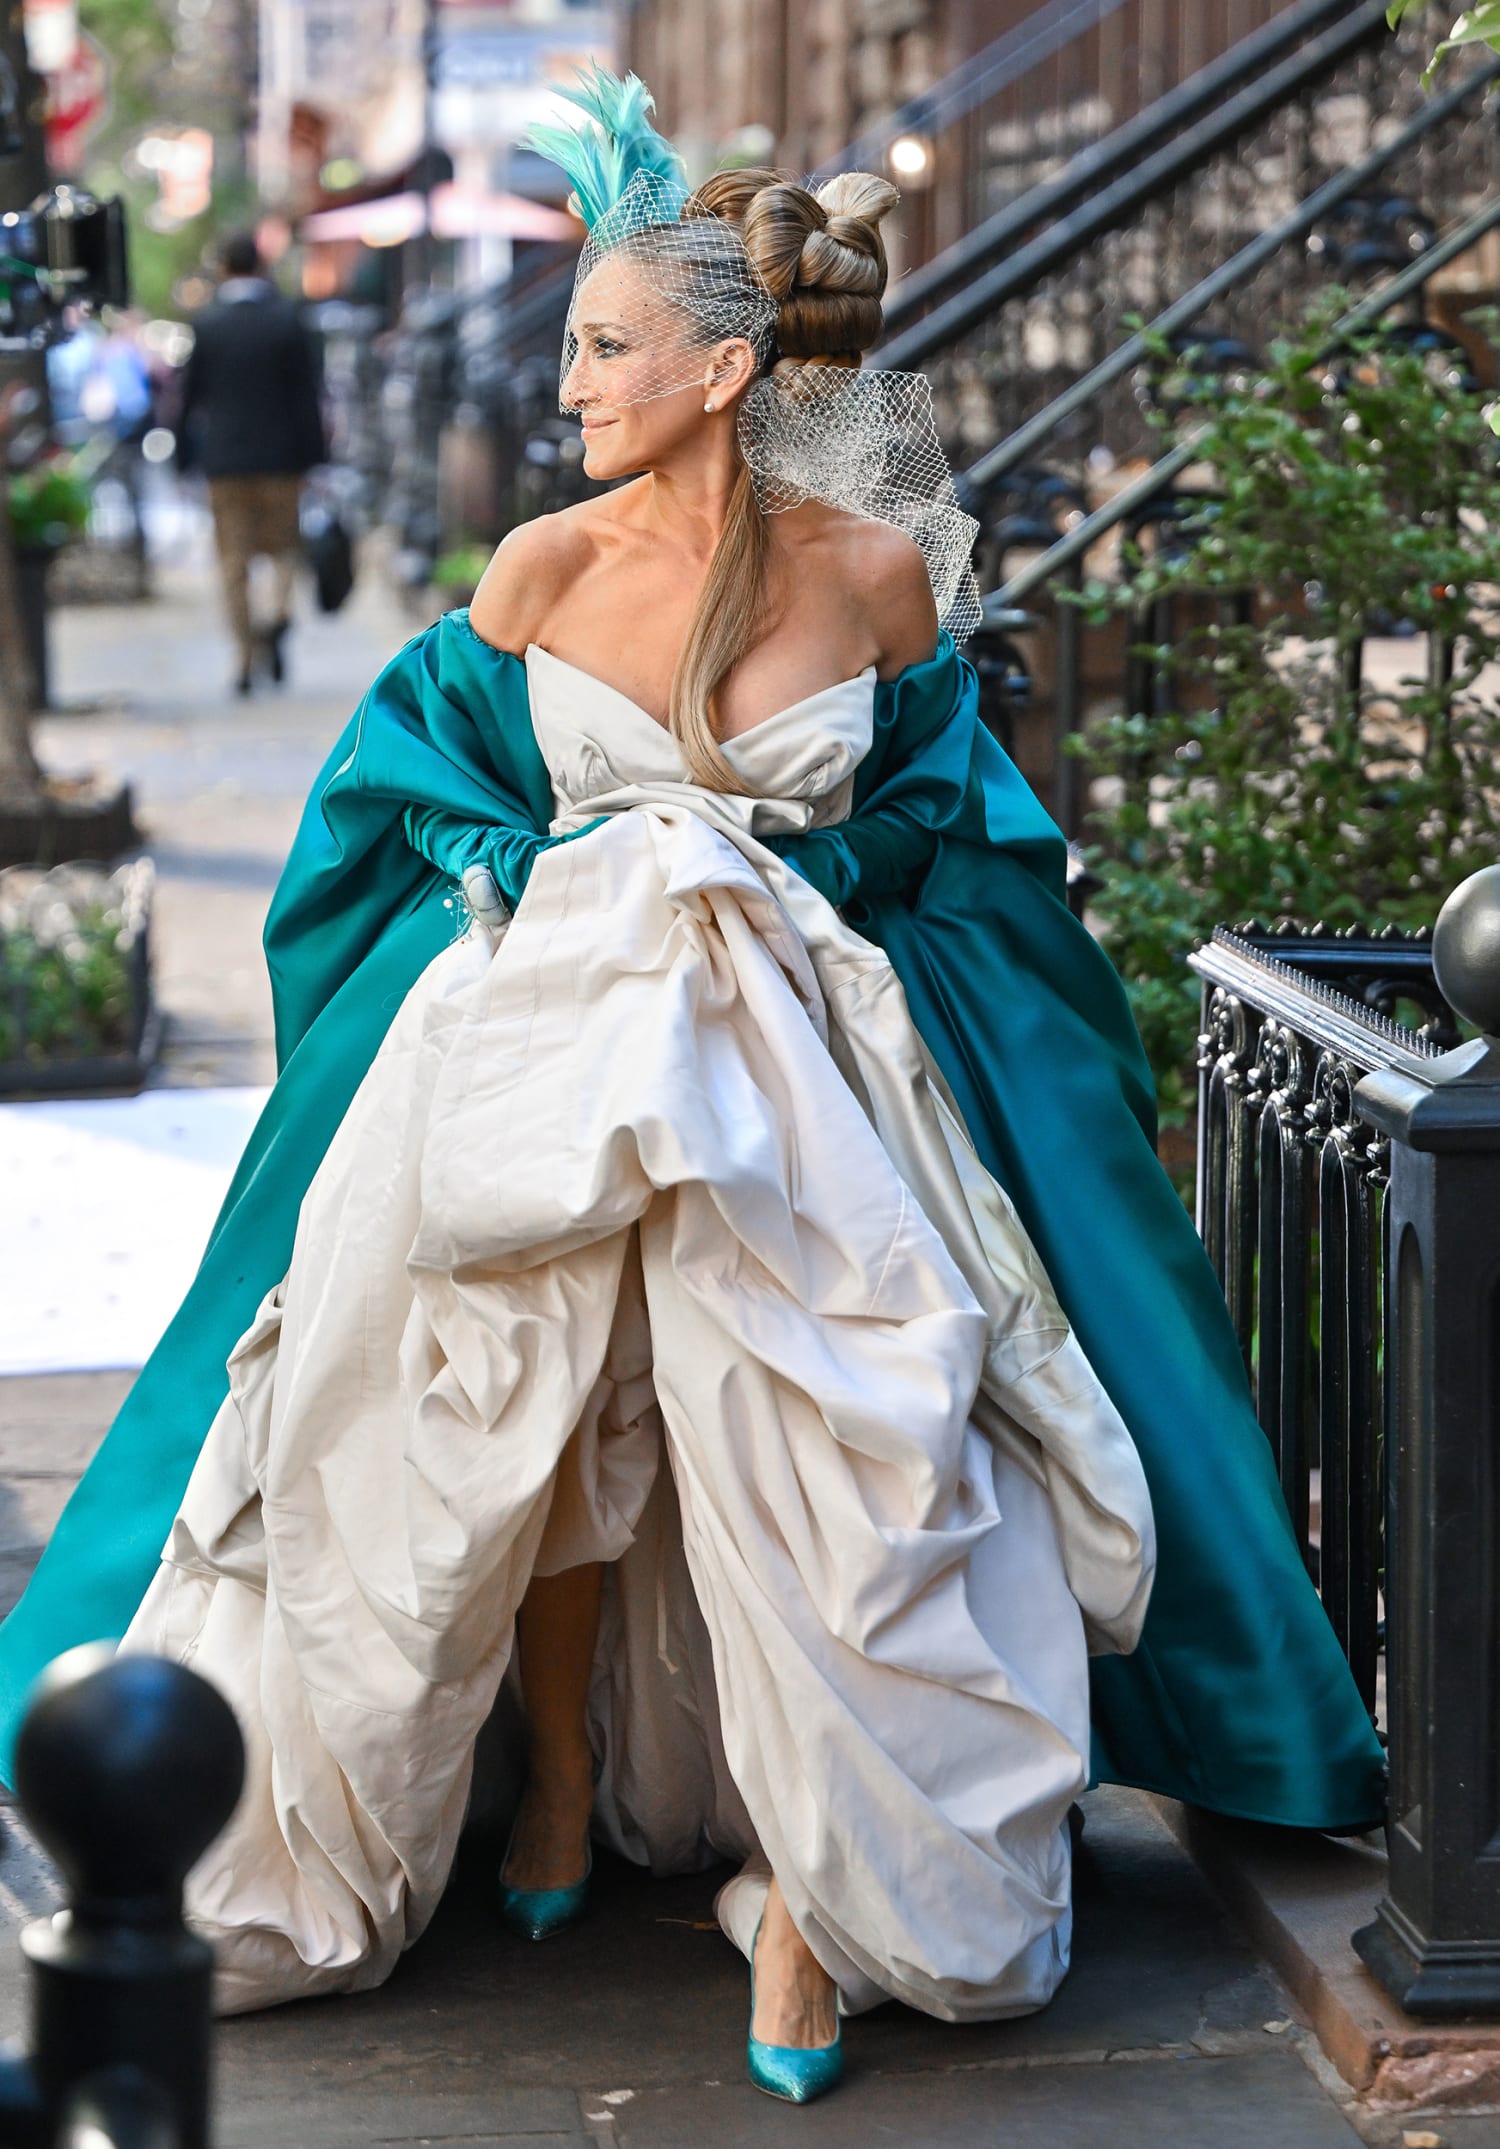 Carrie Bradshaw's wedding dress by Vivienne Westwood sold out